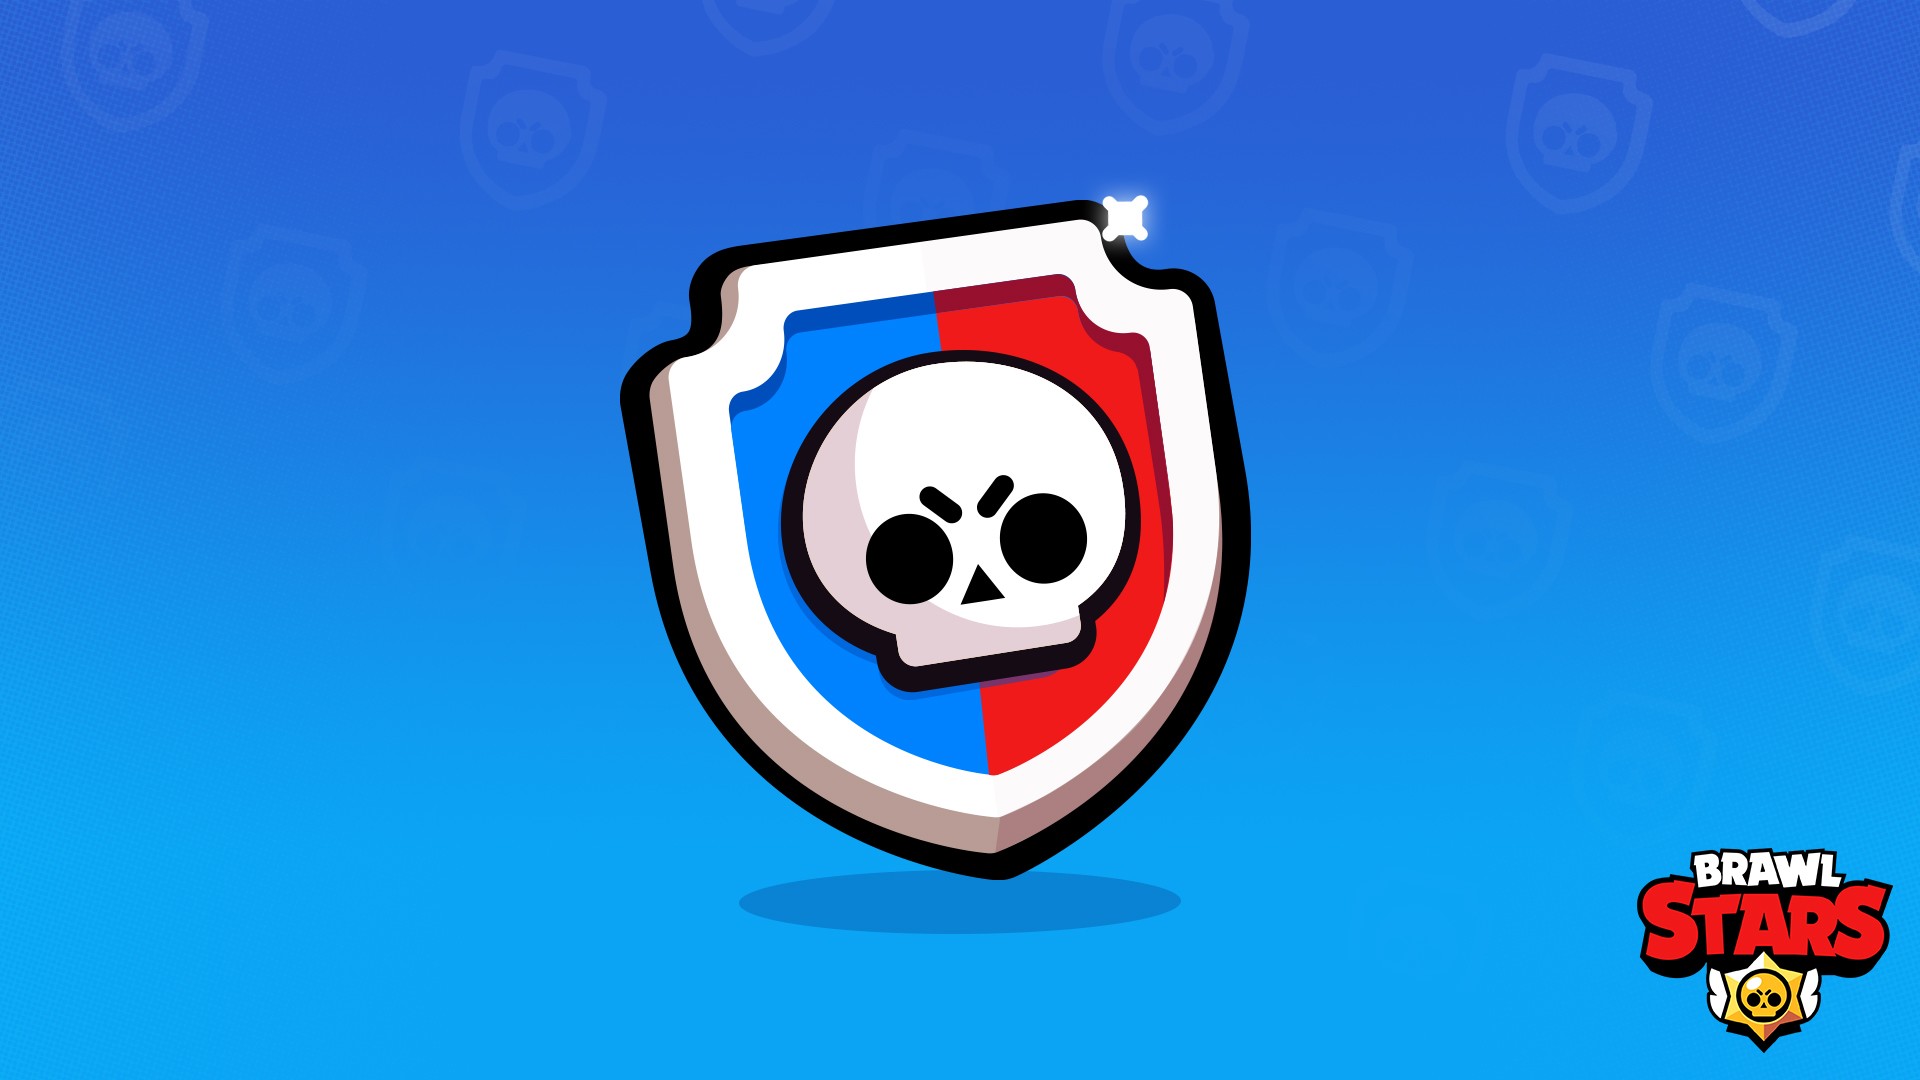 What You Need To Know About The Power League In Brawl Stars Dot Esports - rang 1 brawl stars png